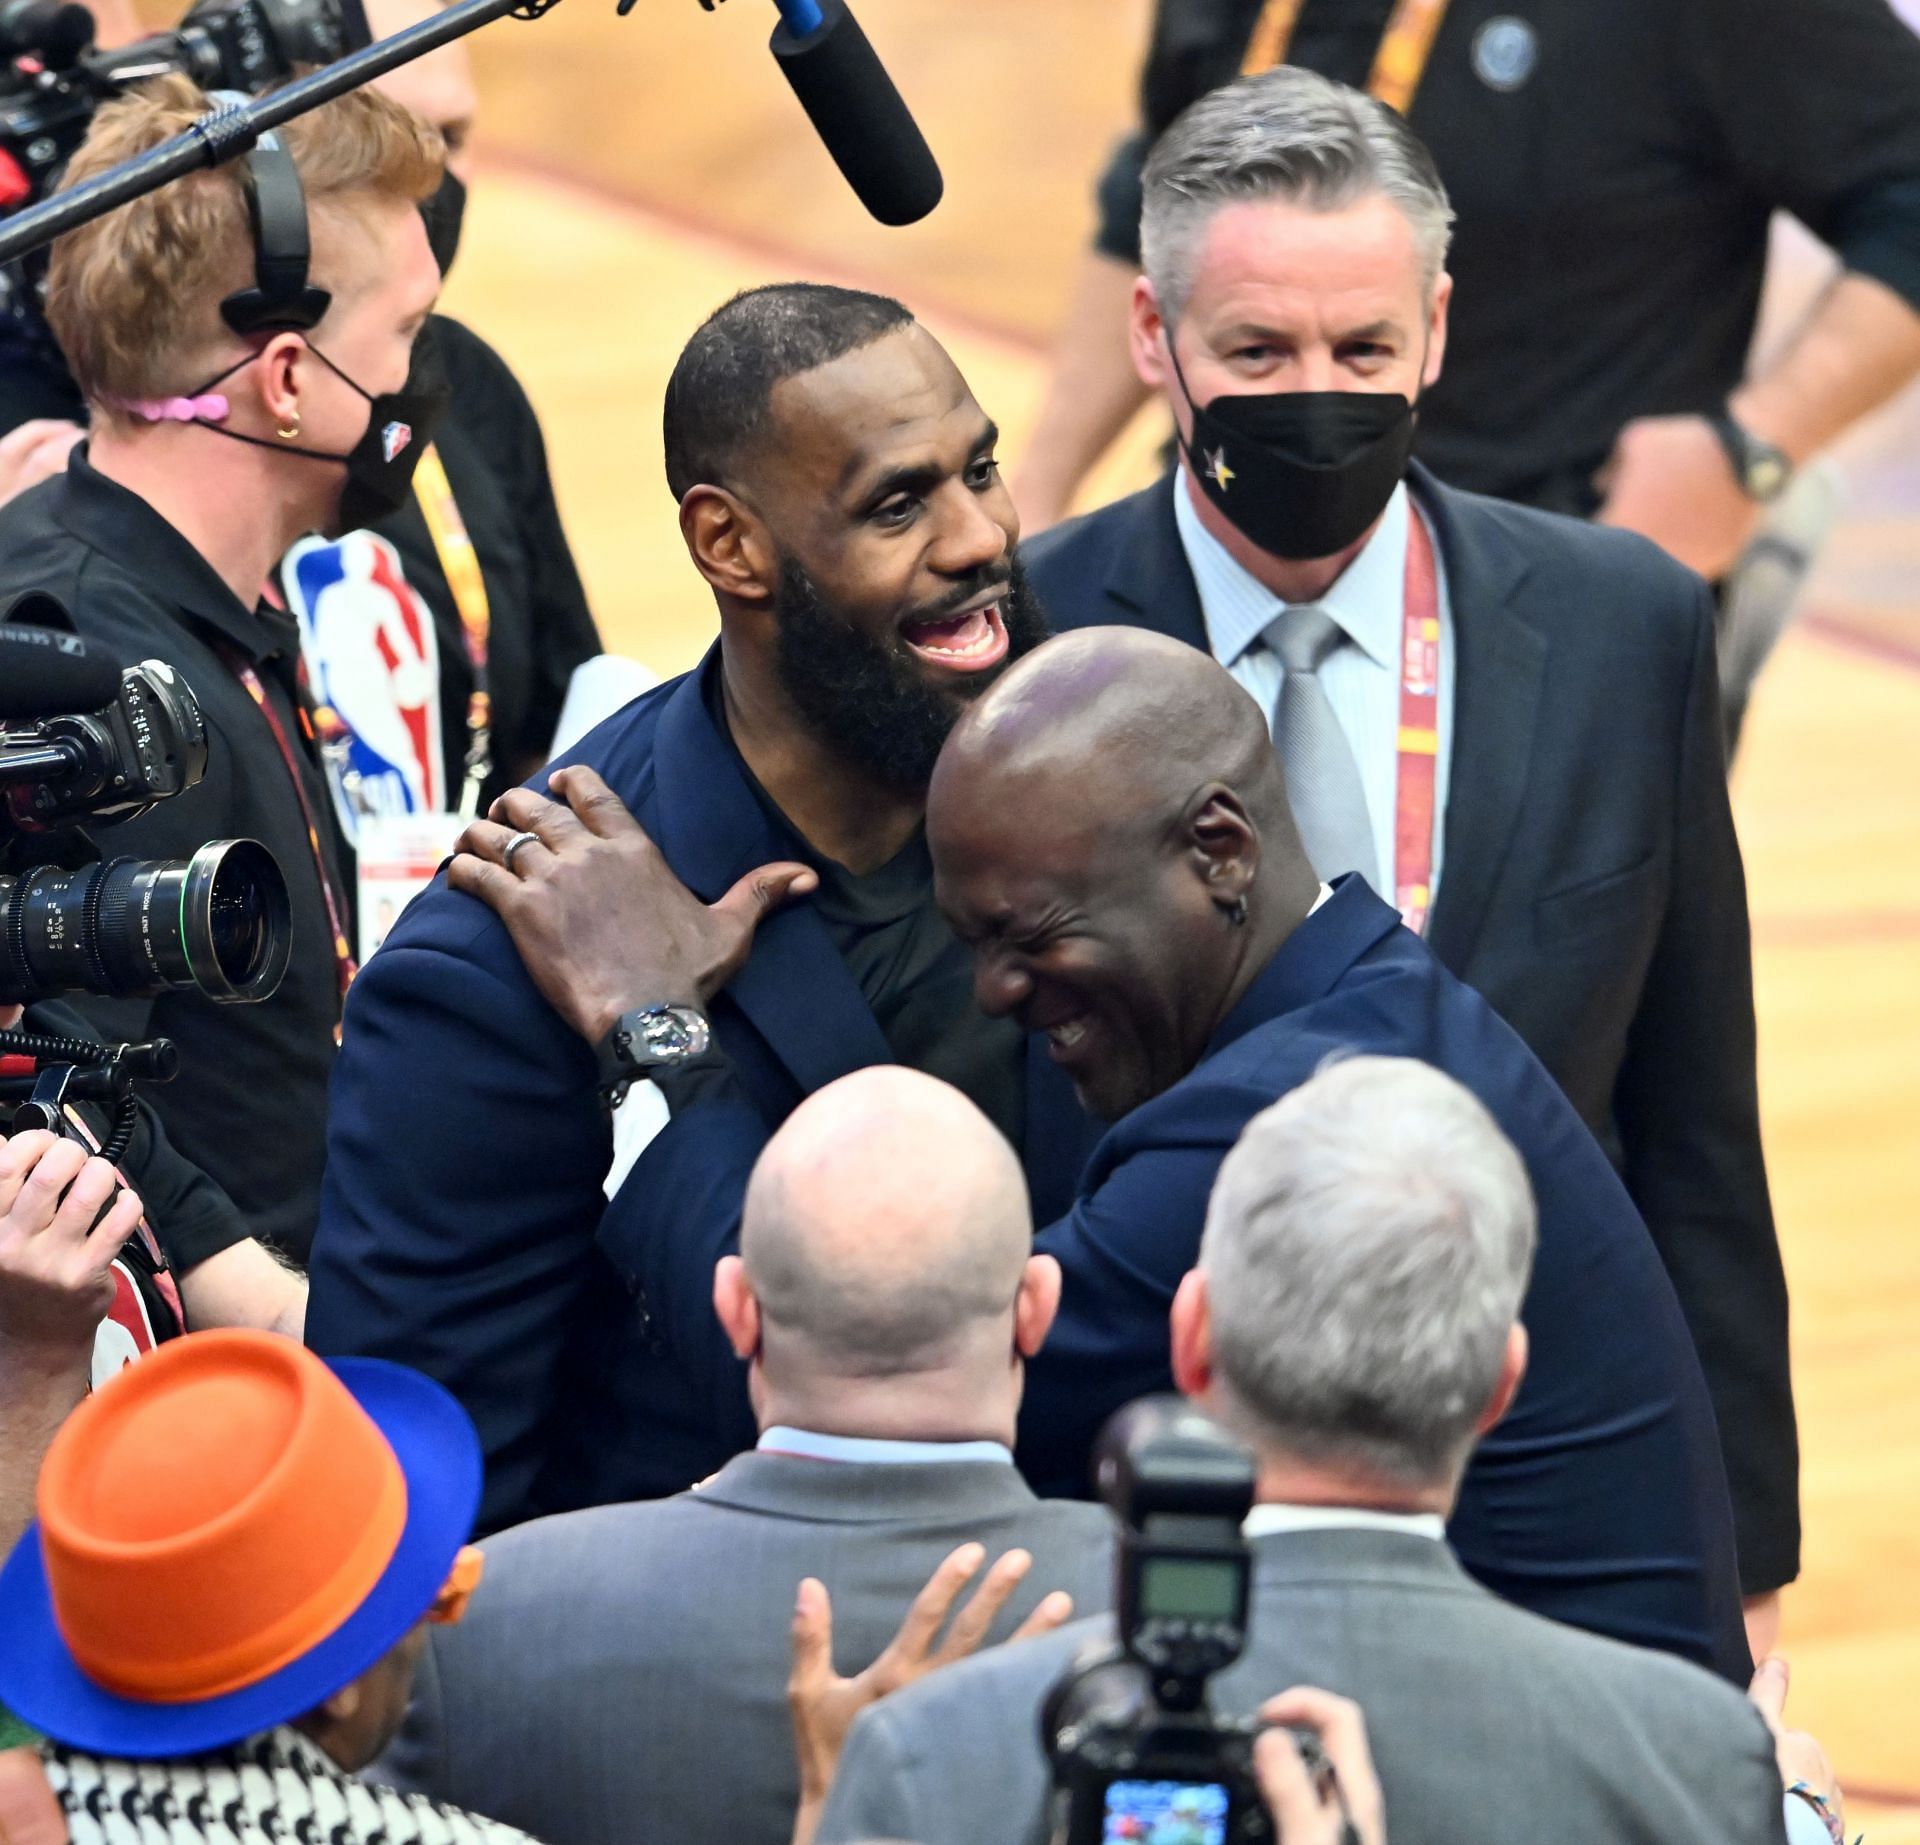 Enter caption Enter caption Michael Jordan (right) and LeBron James hug after the presentation of the NBA 75th Anniversary Team during the 2022 NBA All-Star Game.